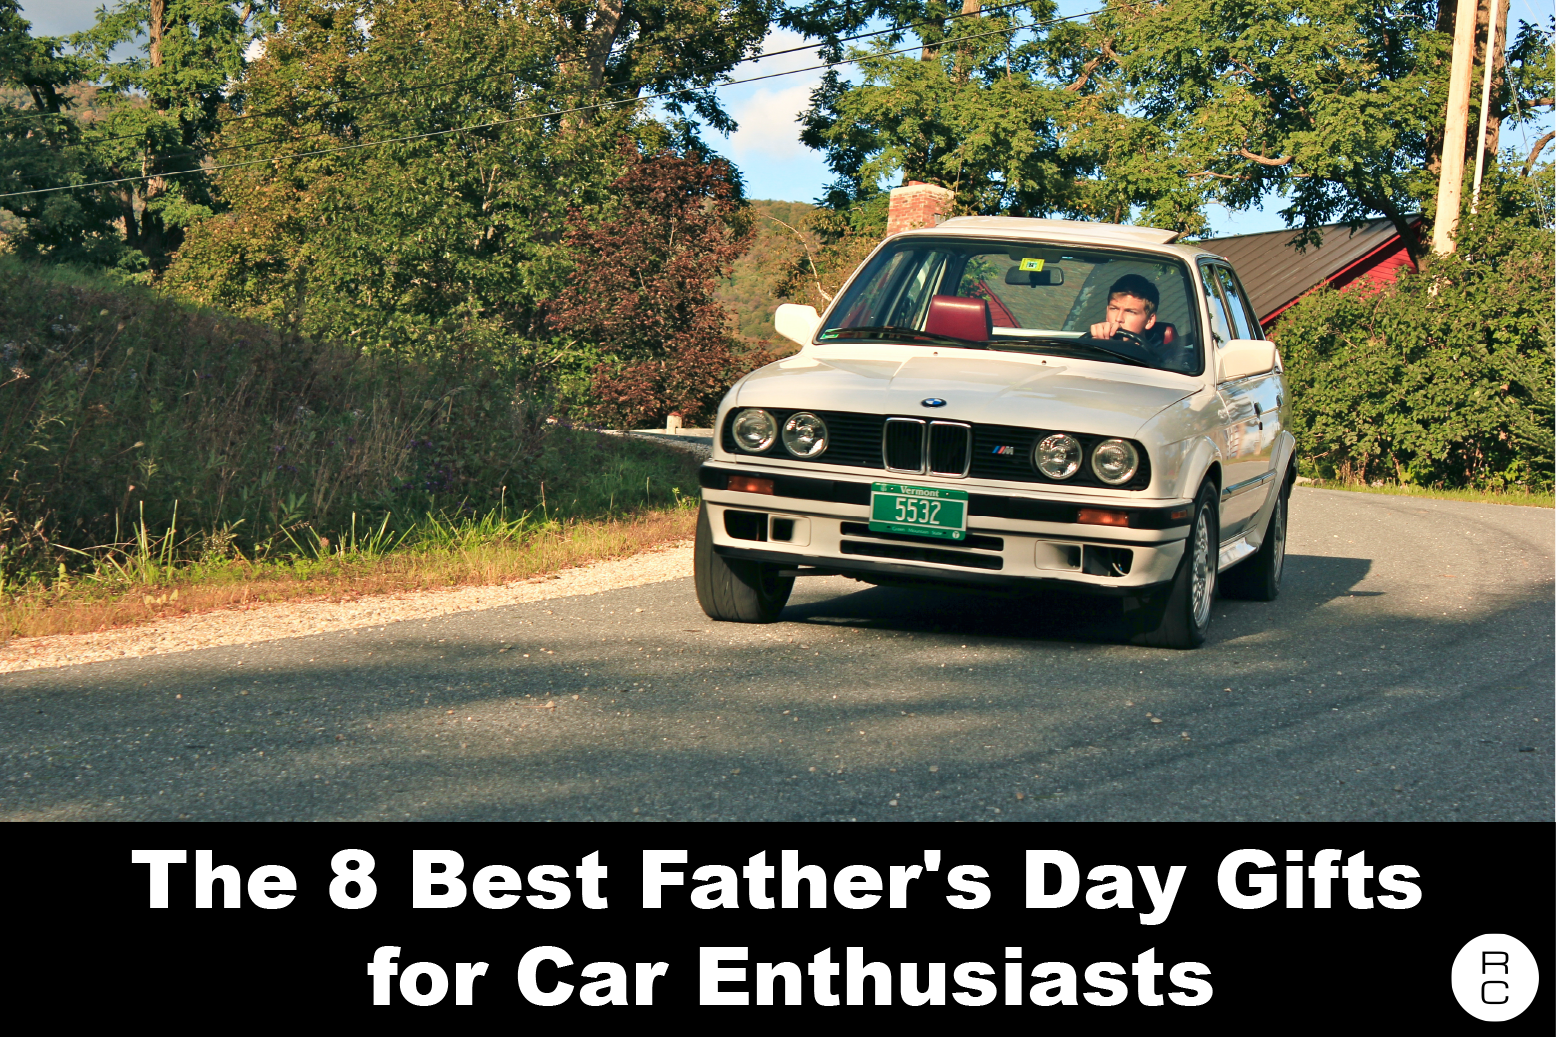 The 8 Best Father's Day Gifts for Car Enthusiasts